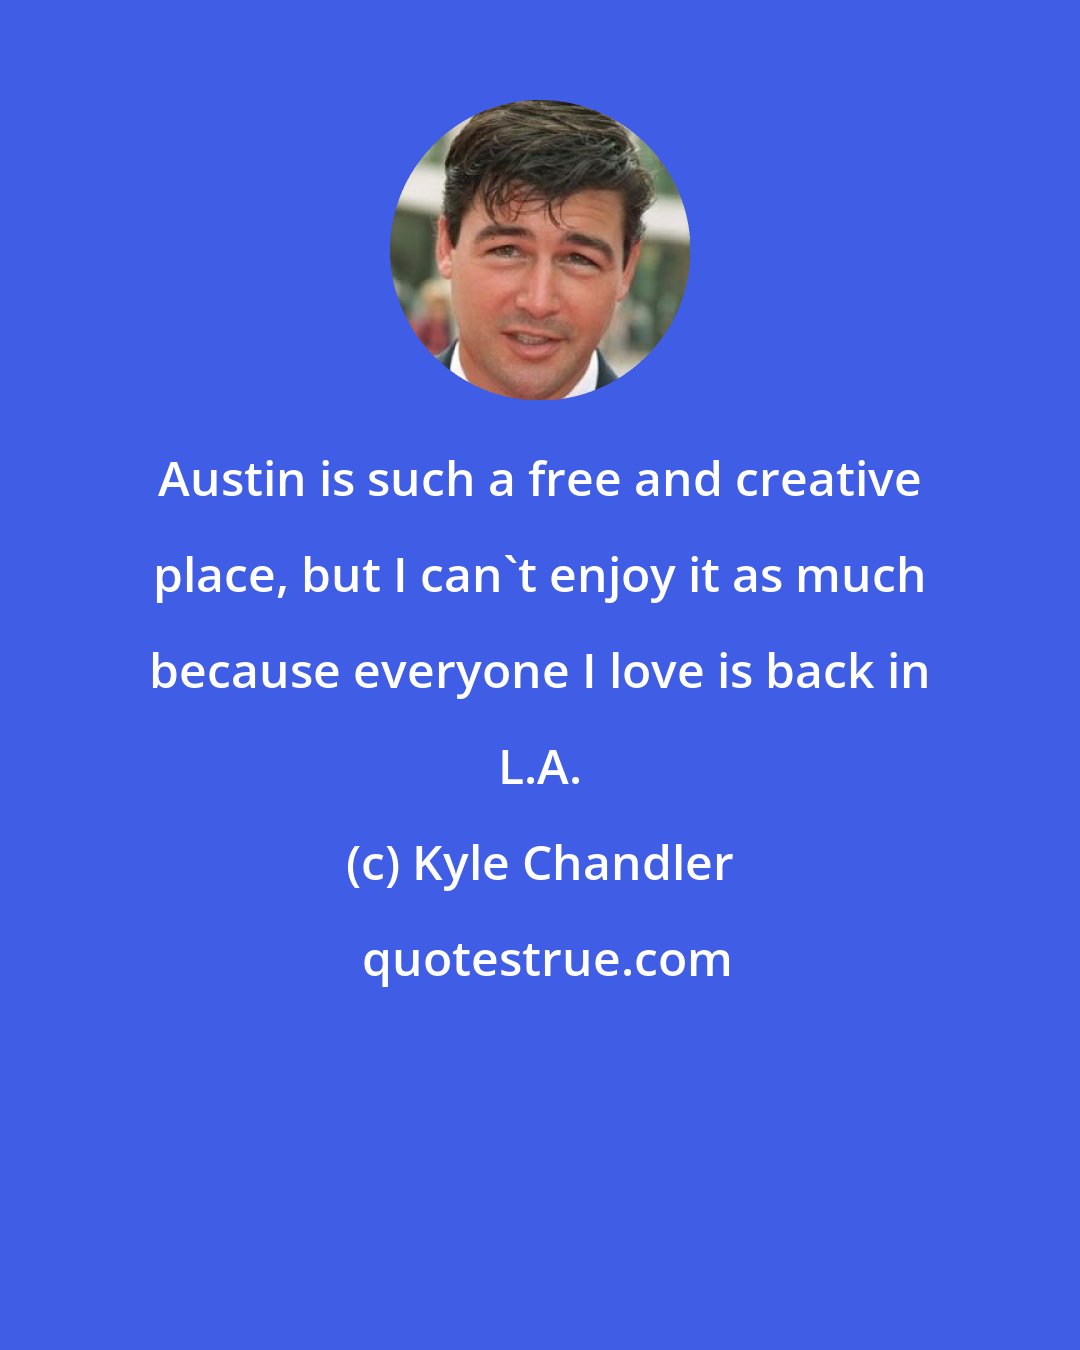 Kyle Chandler: Austin is such a free and creative place, but I can't enjoy it as much because everyone I love is back in L.A.